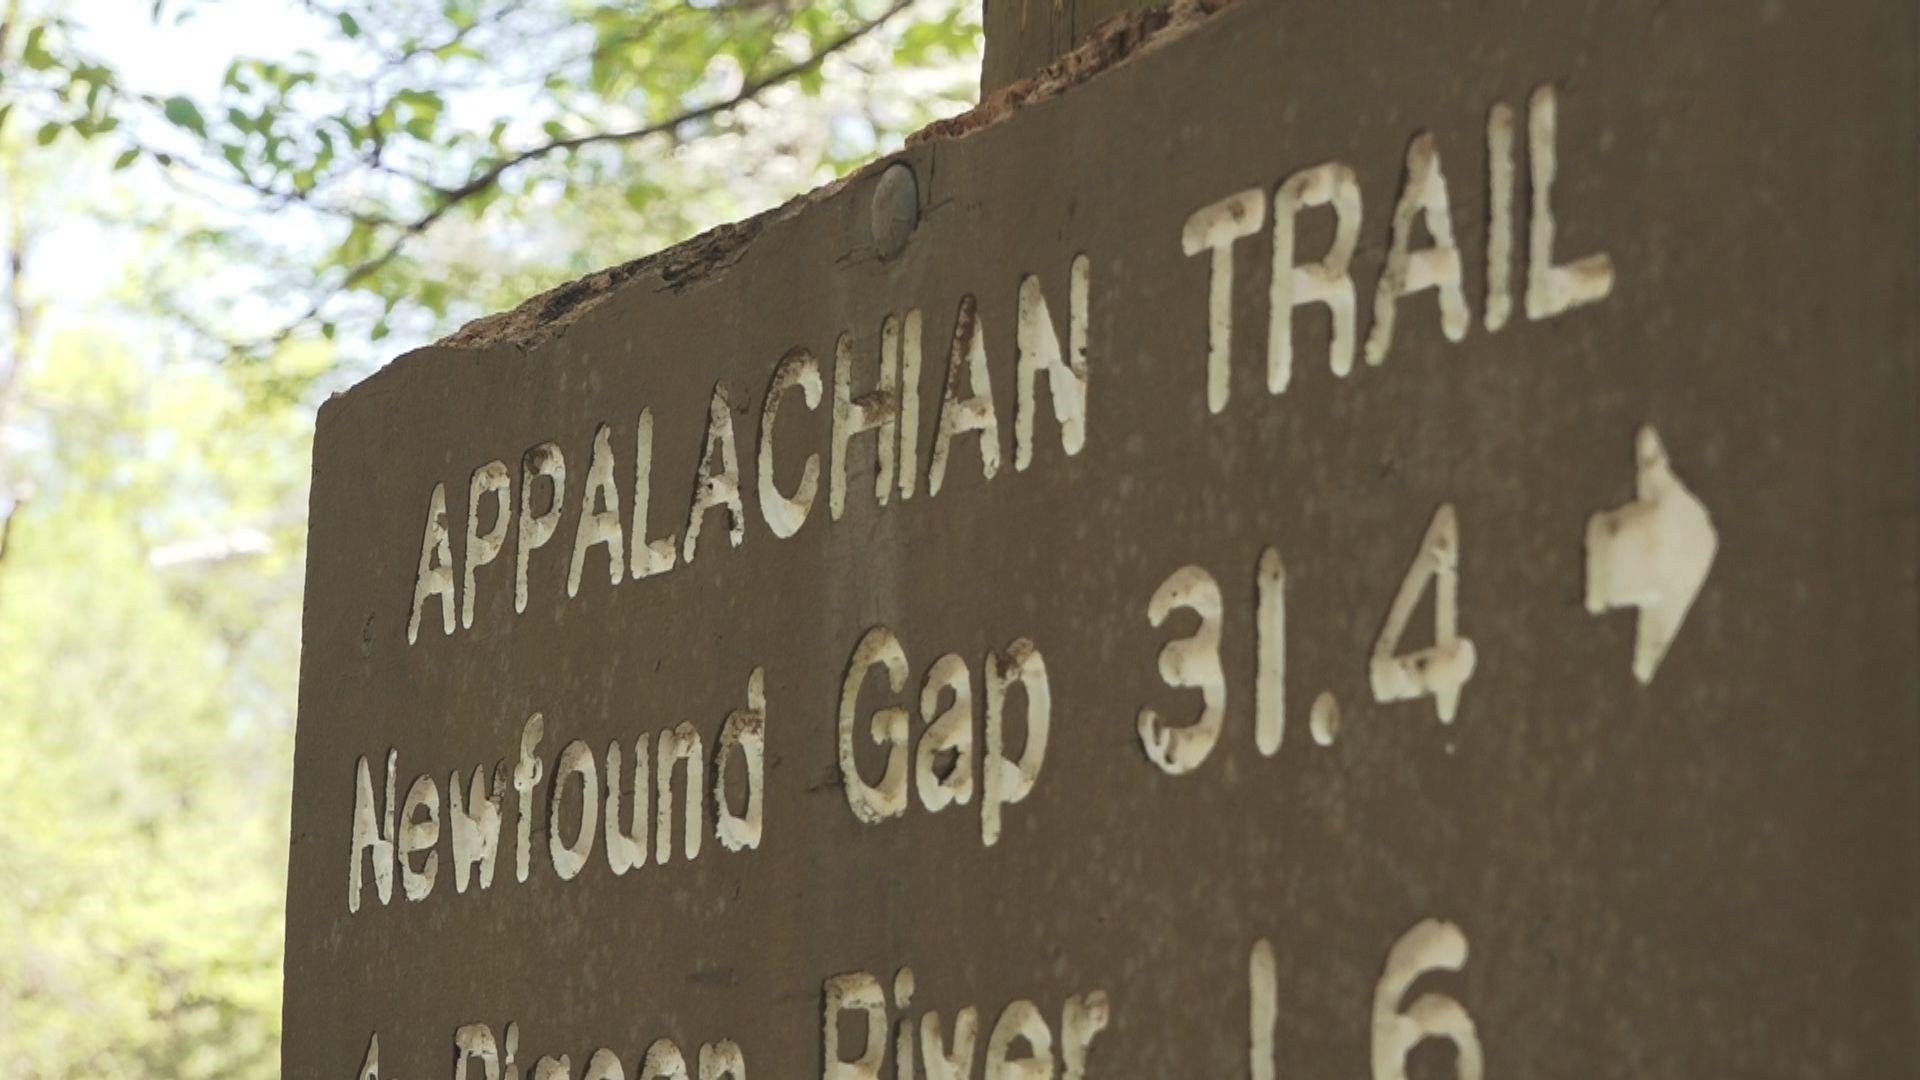 A recent assault arrest on the Appalachian Trail prompted a conversation about safety on the hike. Guns are allowed on some portions of the trail, but many hikers are more worried about wildlife than fellow hikers.